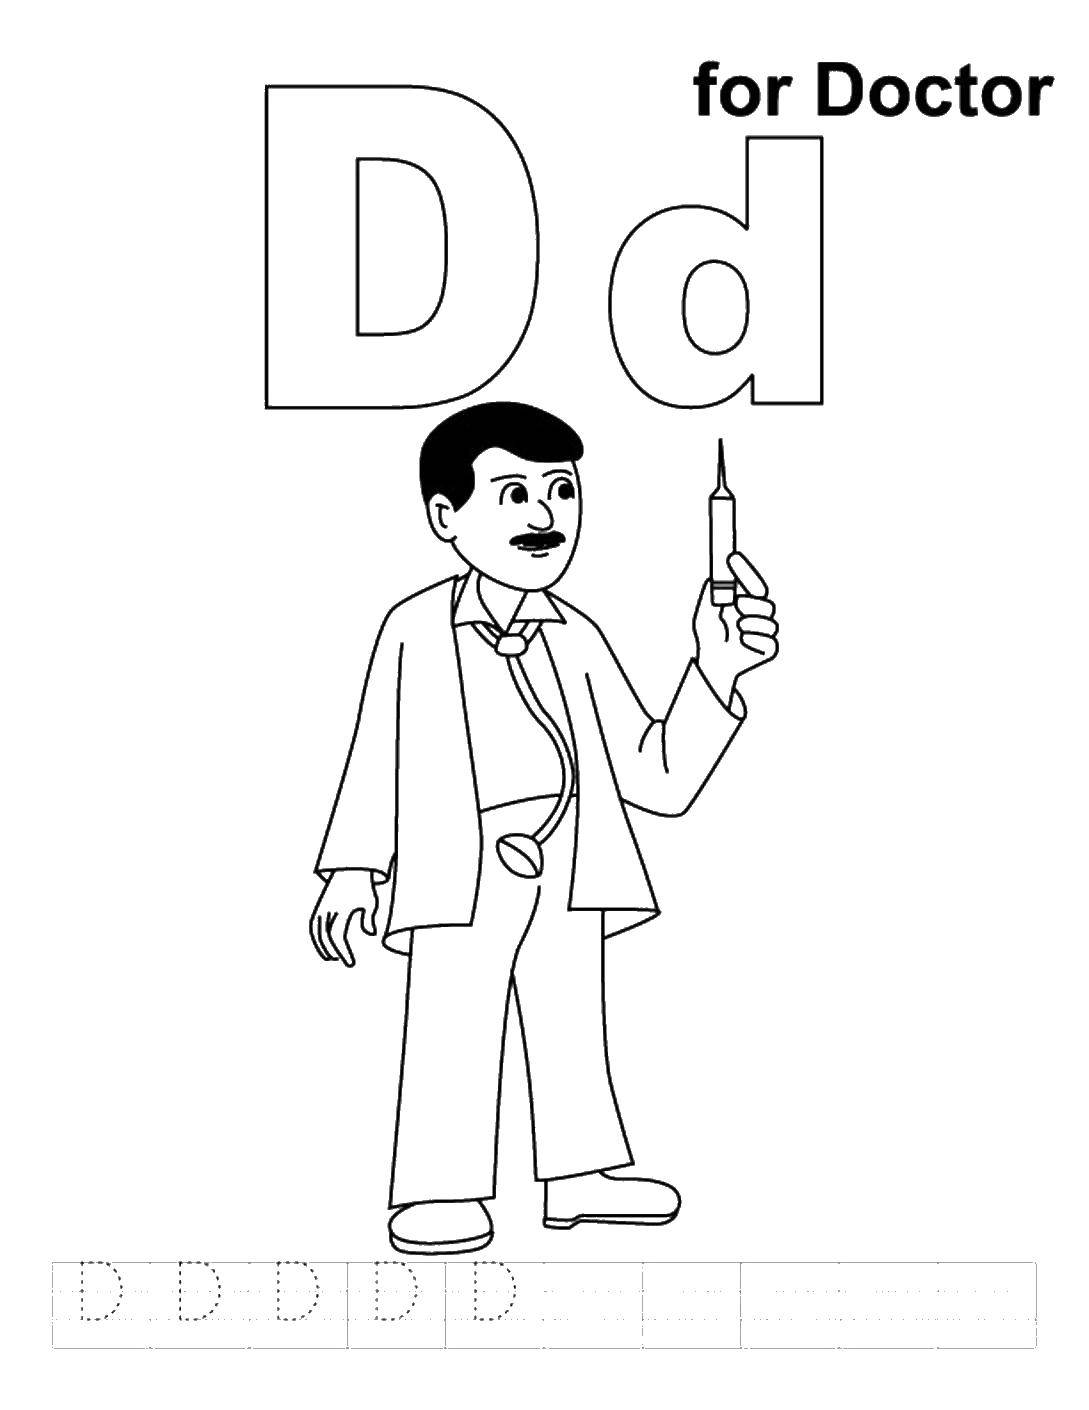 Coloring The doctor and the syringe. Category Medical coloring pages. Tags:  doctor , syringe, stethoscope.